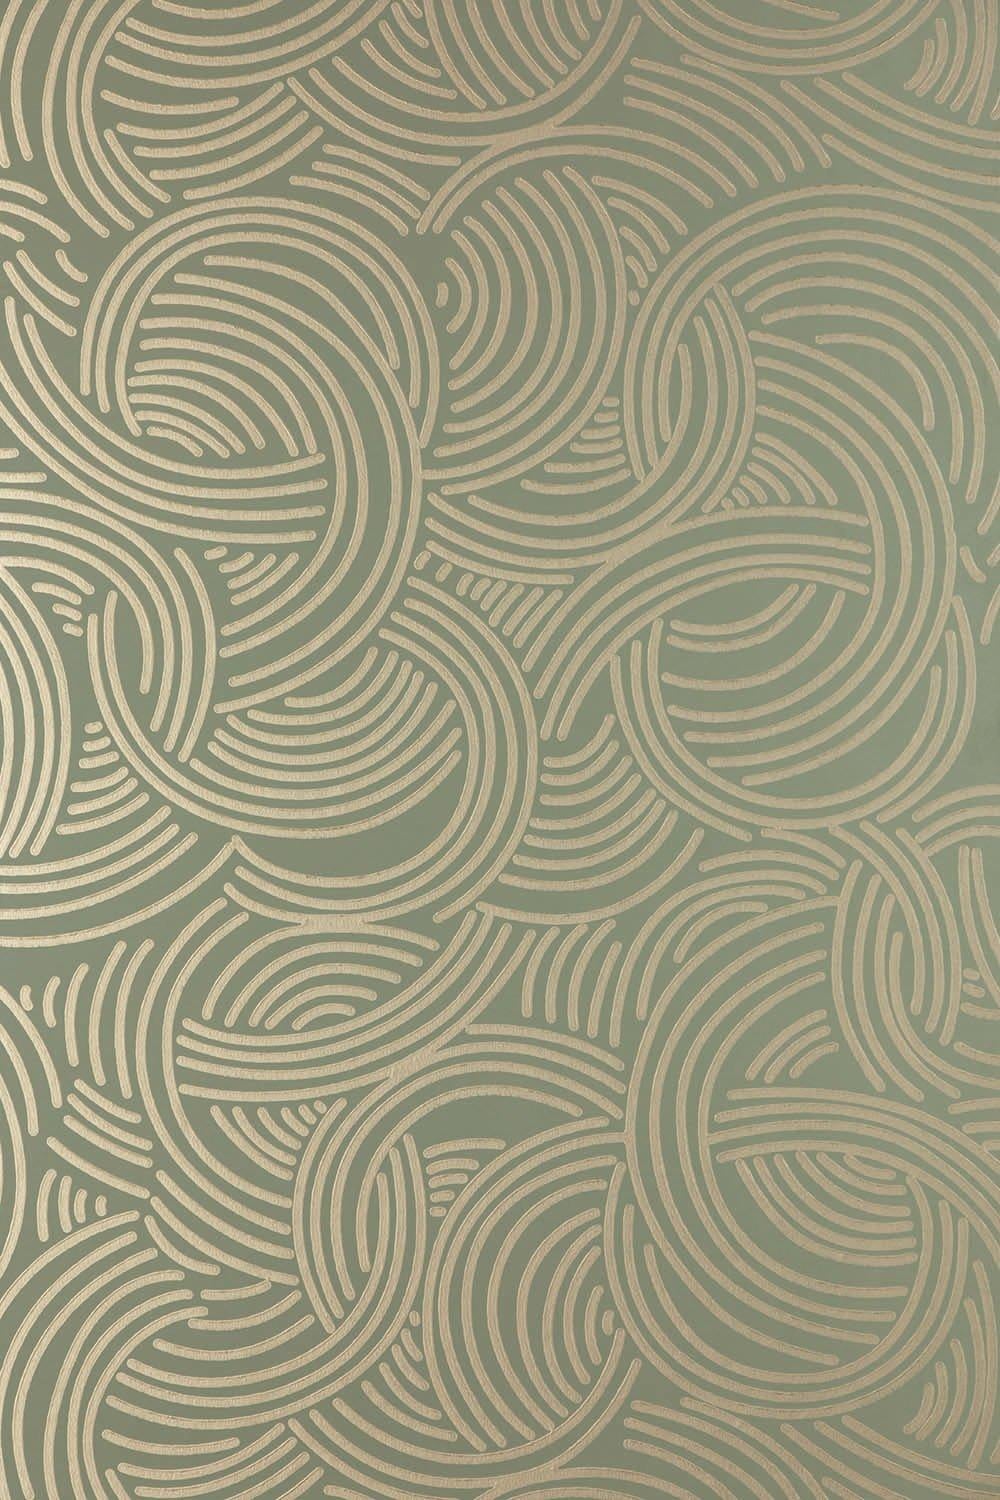 Art Deco green Tourbillon BP 4808 farrow and ball hand-printed wallpaper, UK. Custom printed by hand in Dorset, England. Lovely texture. Farrow and Ball uses their luxurious, highly-pigmented wall paints for their wallpapers. 


Our Tourbillon